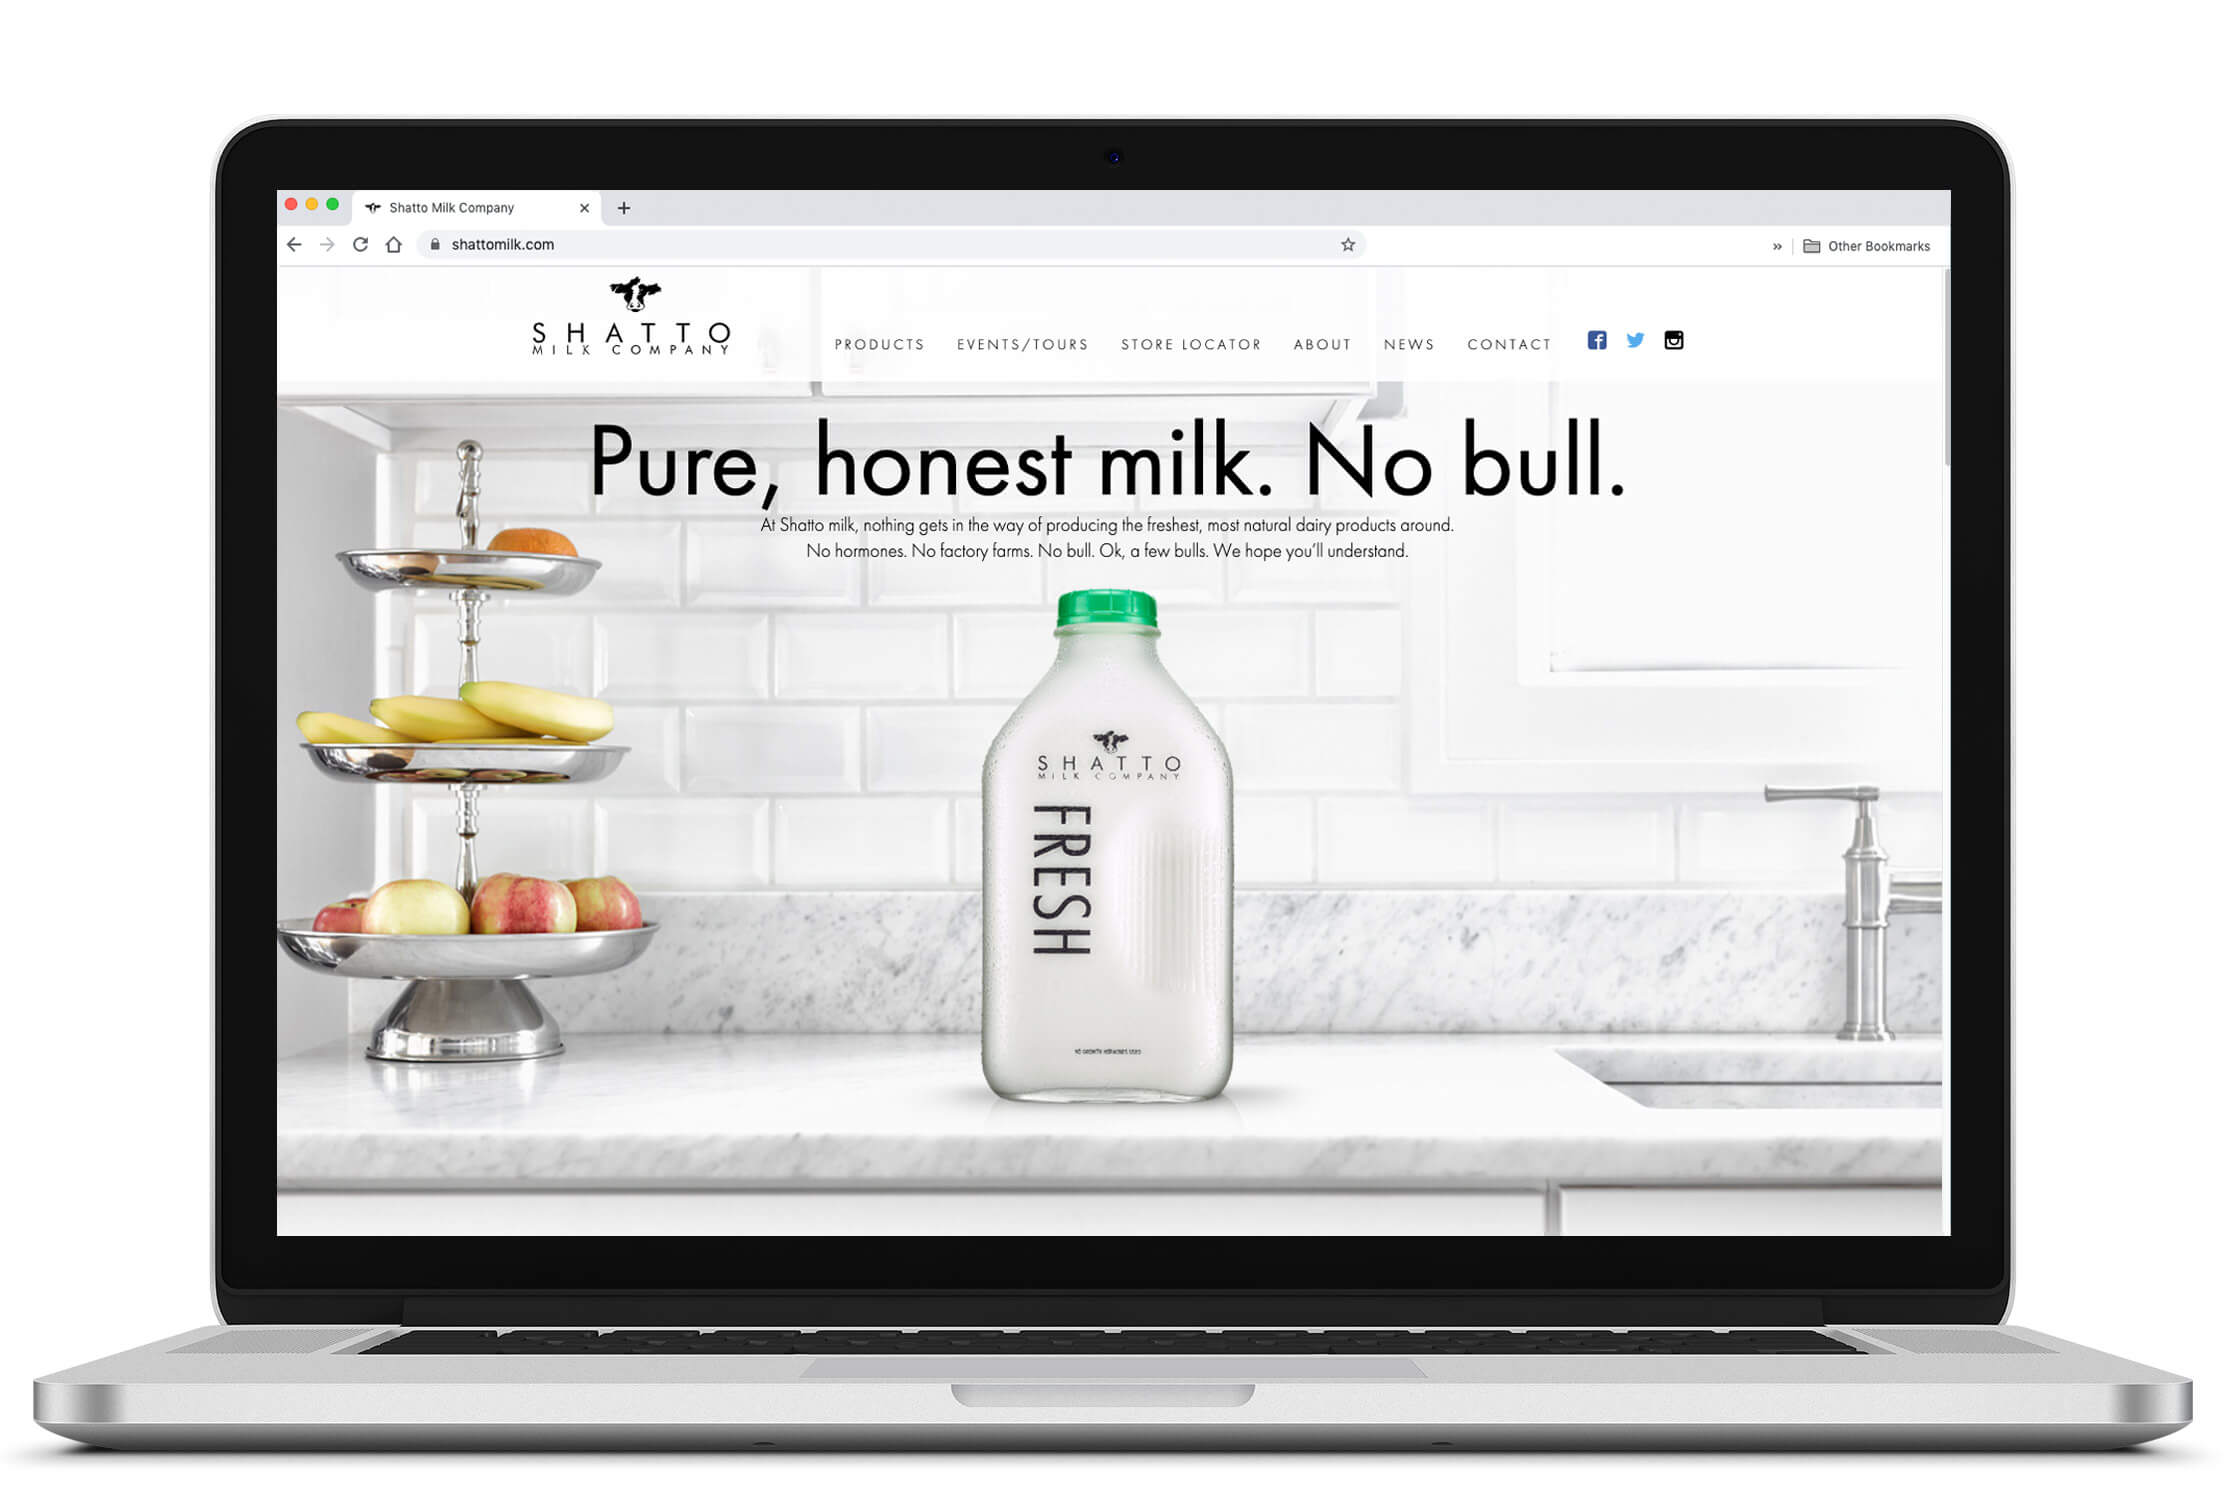 Laptop showing Shatto Milk Company website home page.